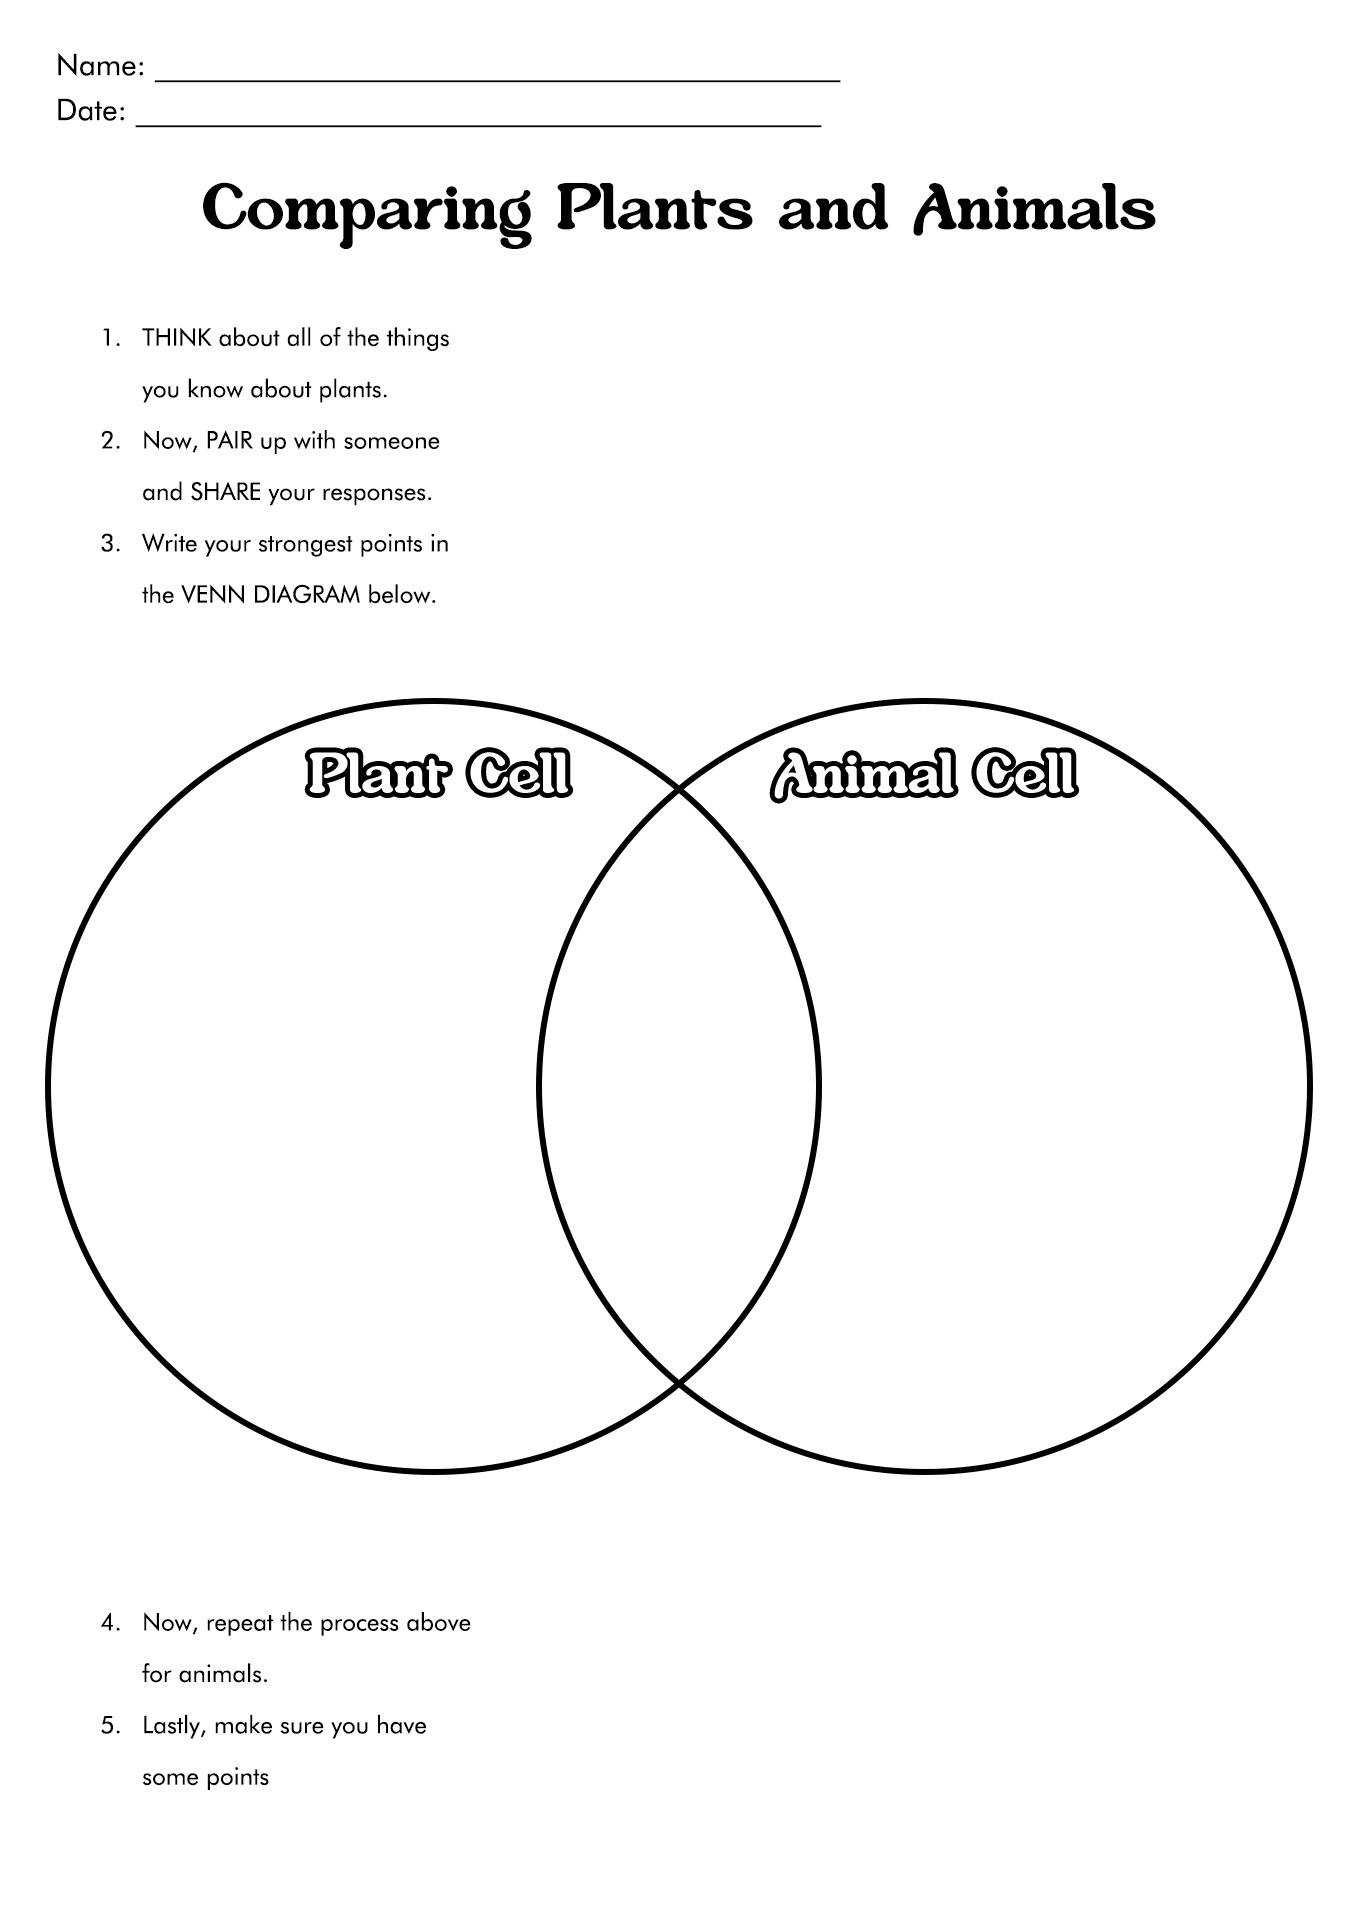 Plant and Animal Cells Graphic Organizer Image